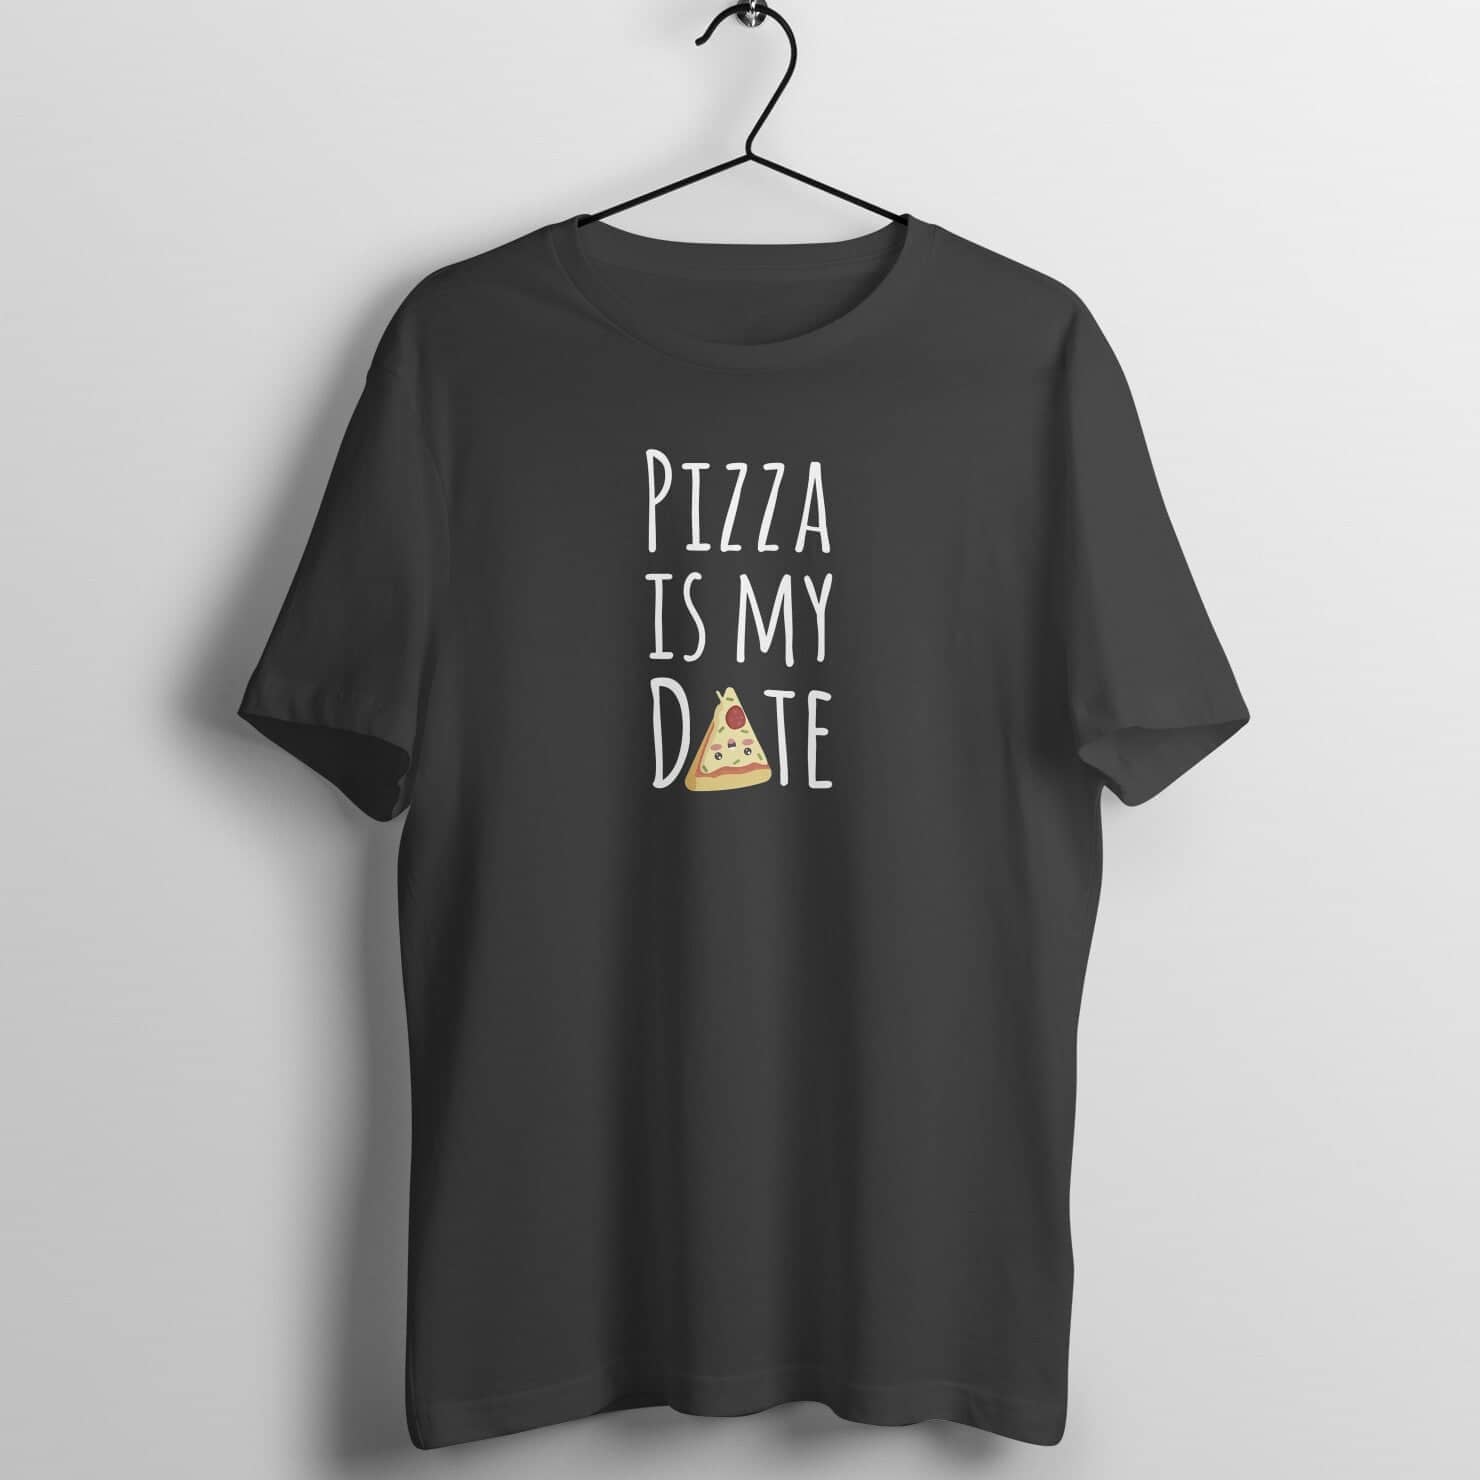 Pizza is My Date Funny Black T Shirt for Men and Women freeshipping - Catch My Drift India